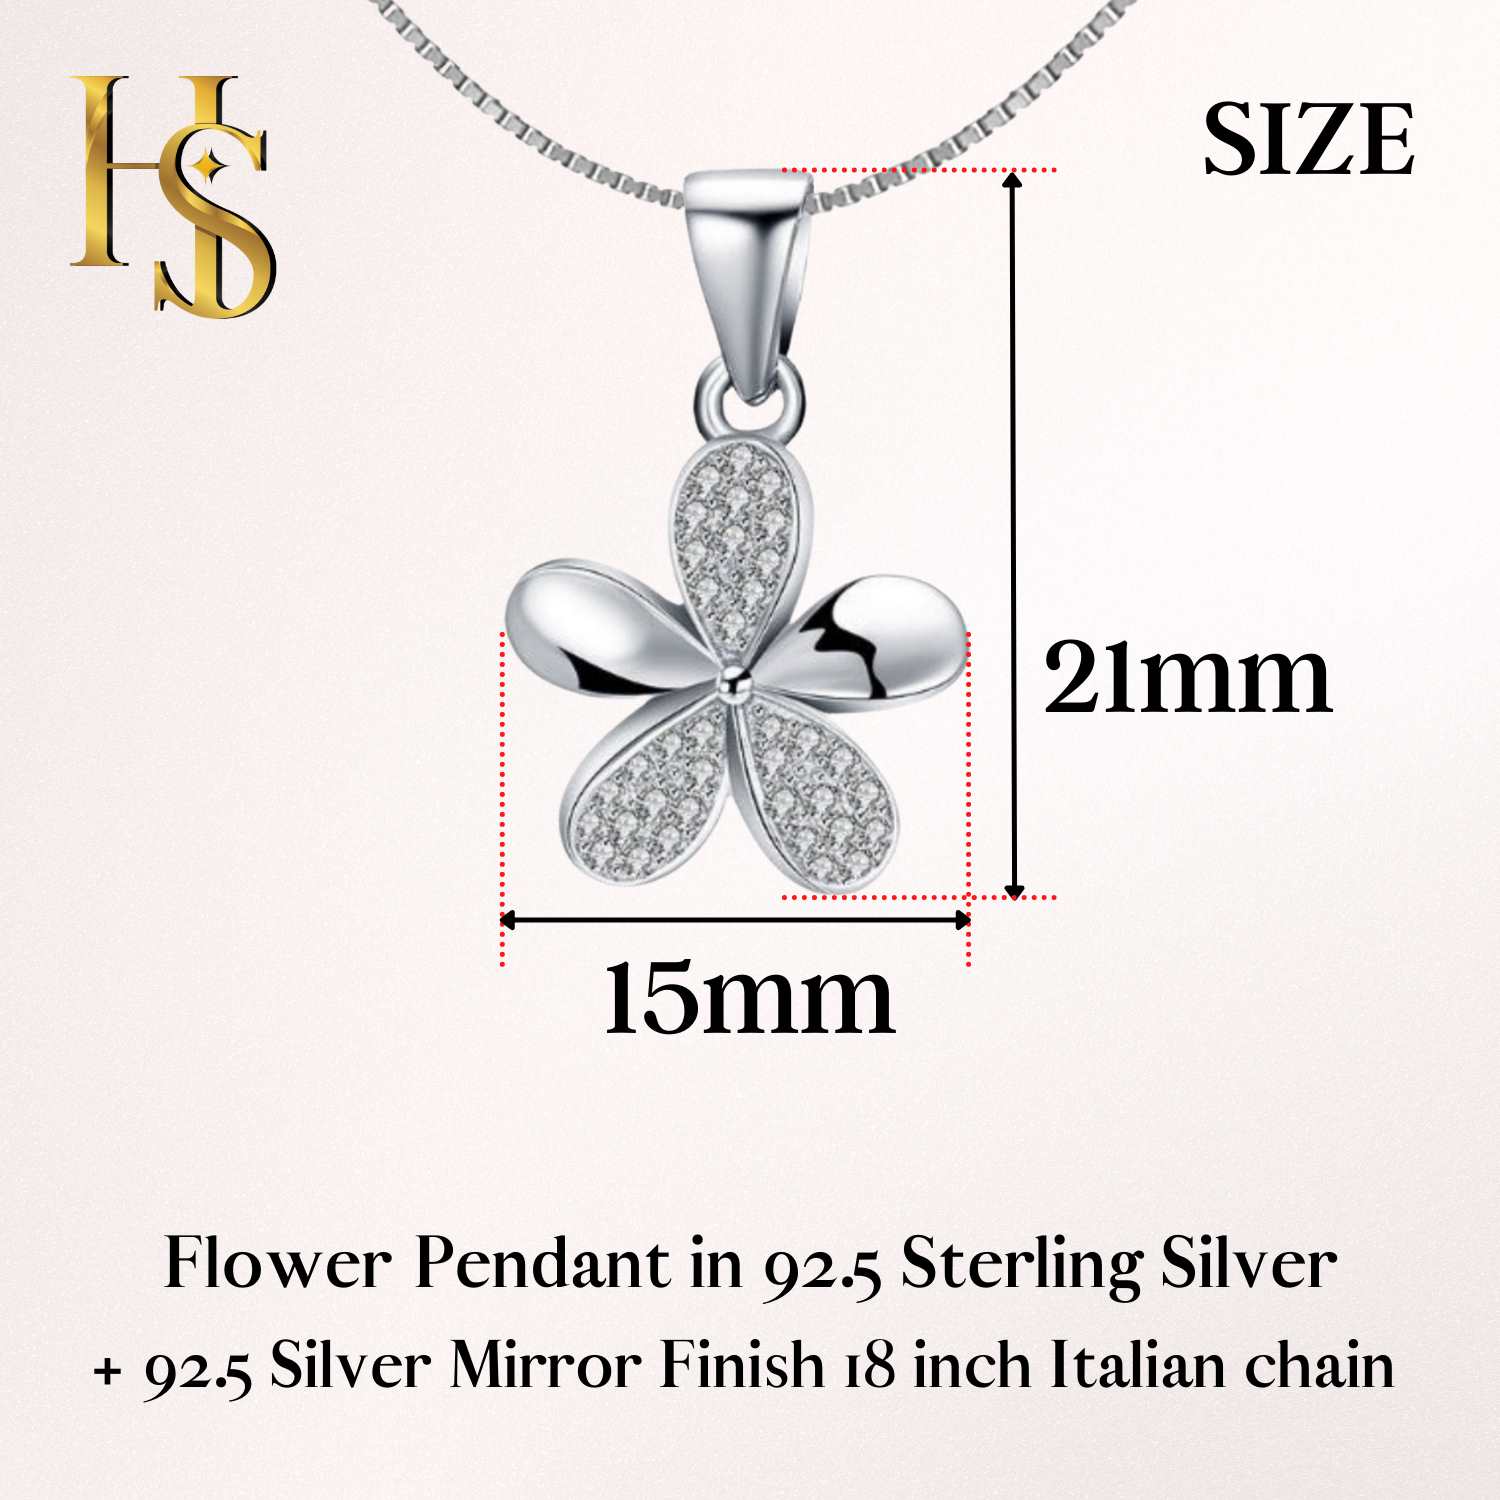 Flower Pendant in 92.5 Sterling Silver Studded with Zirconia